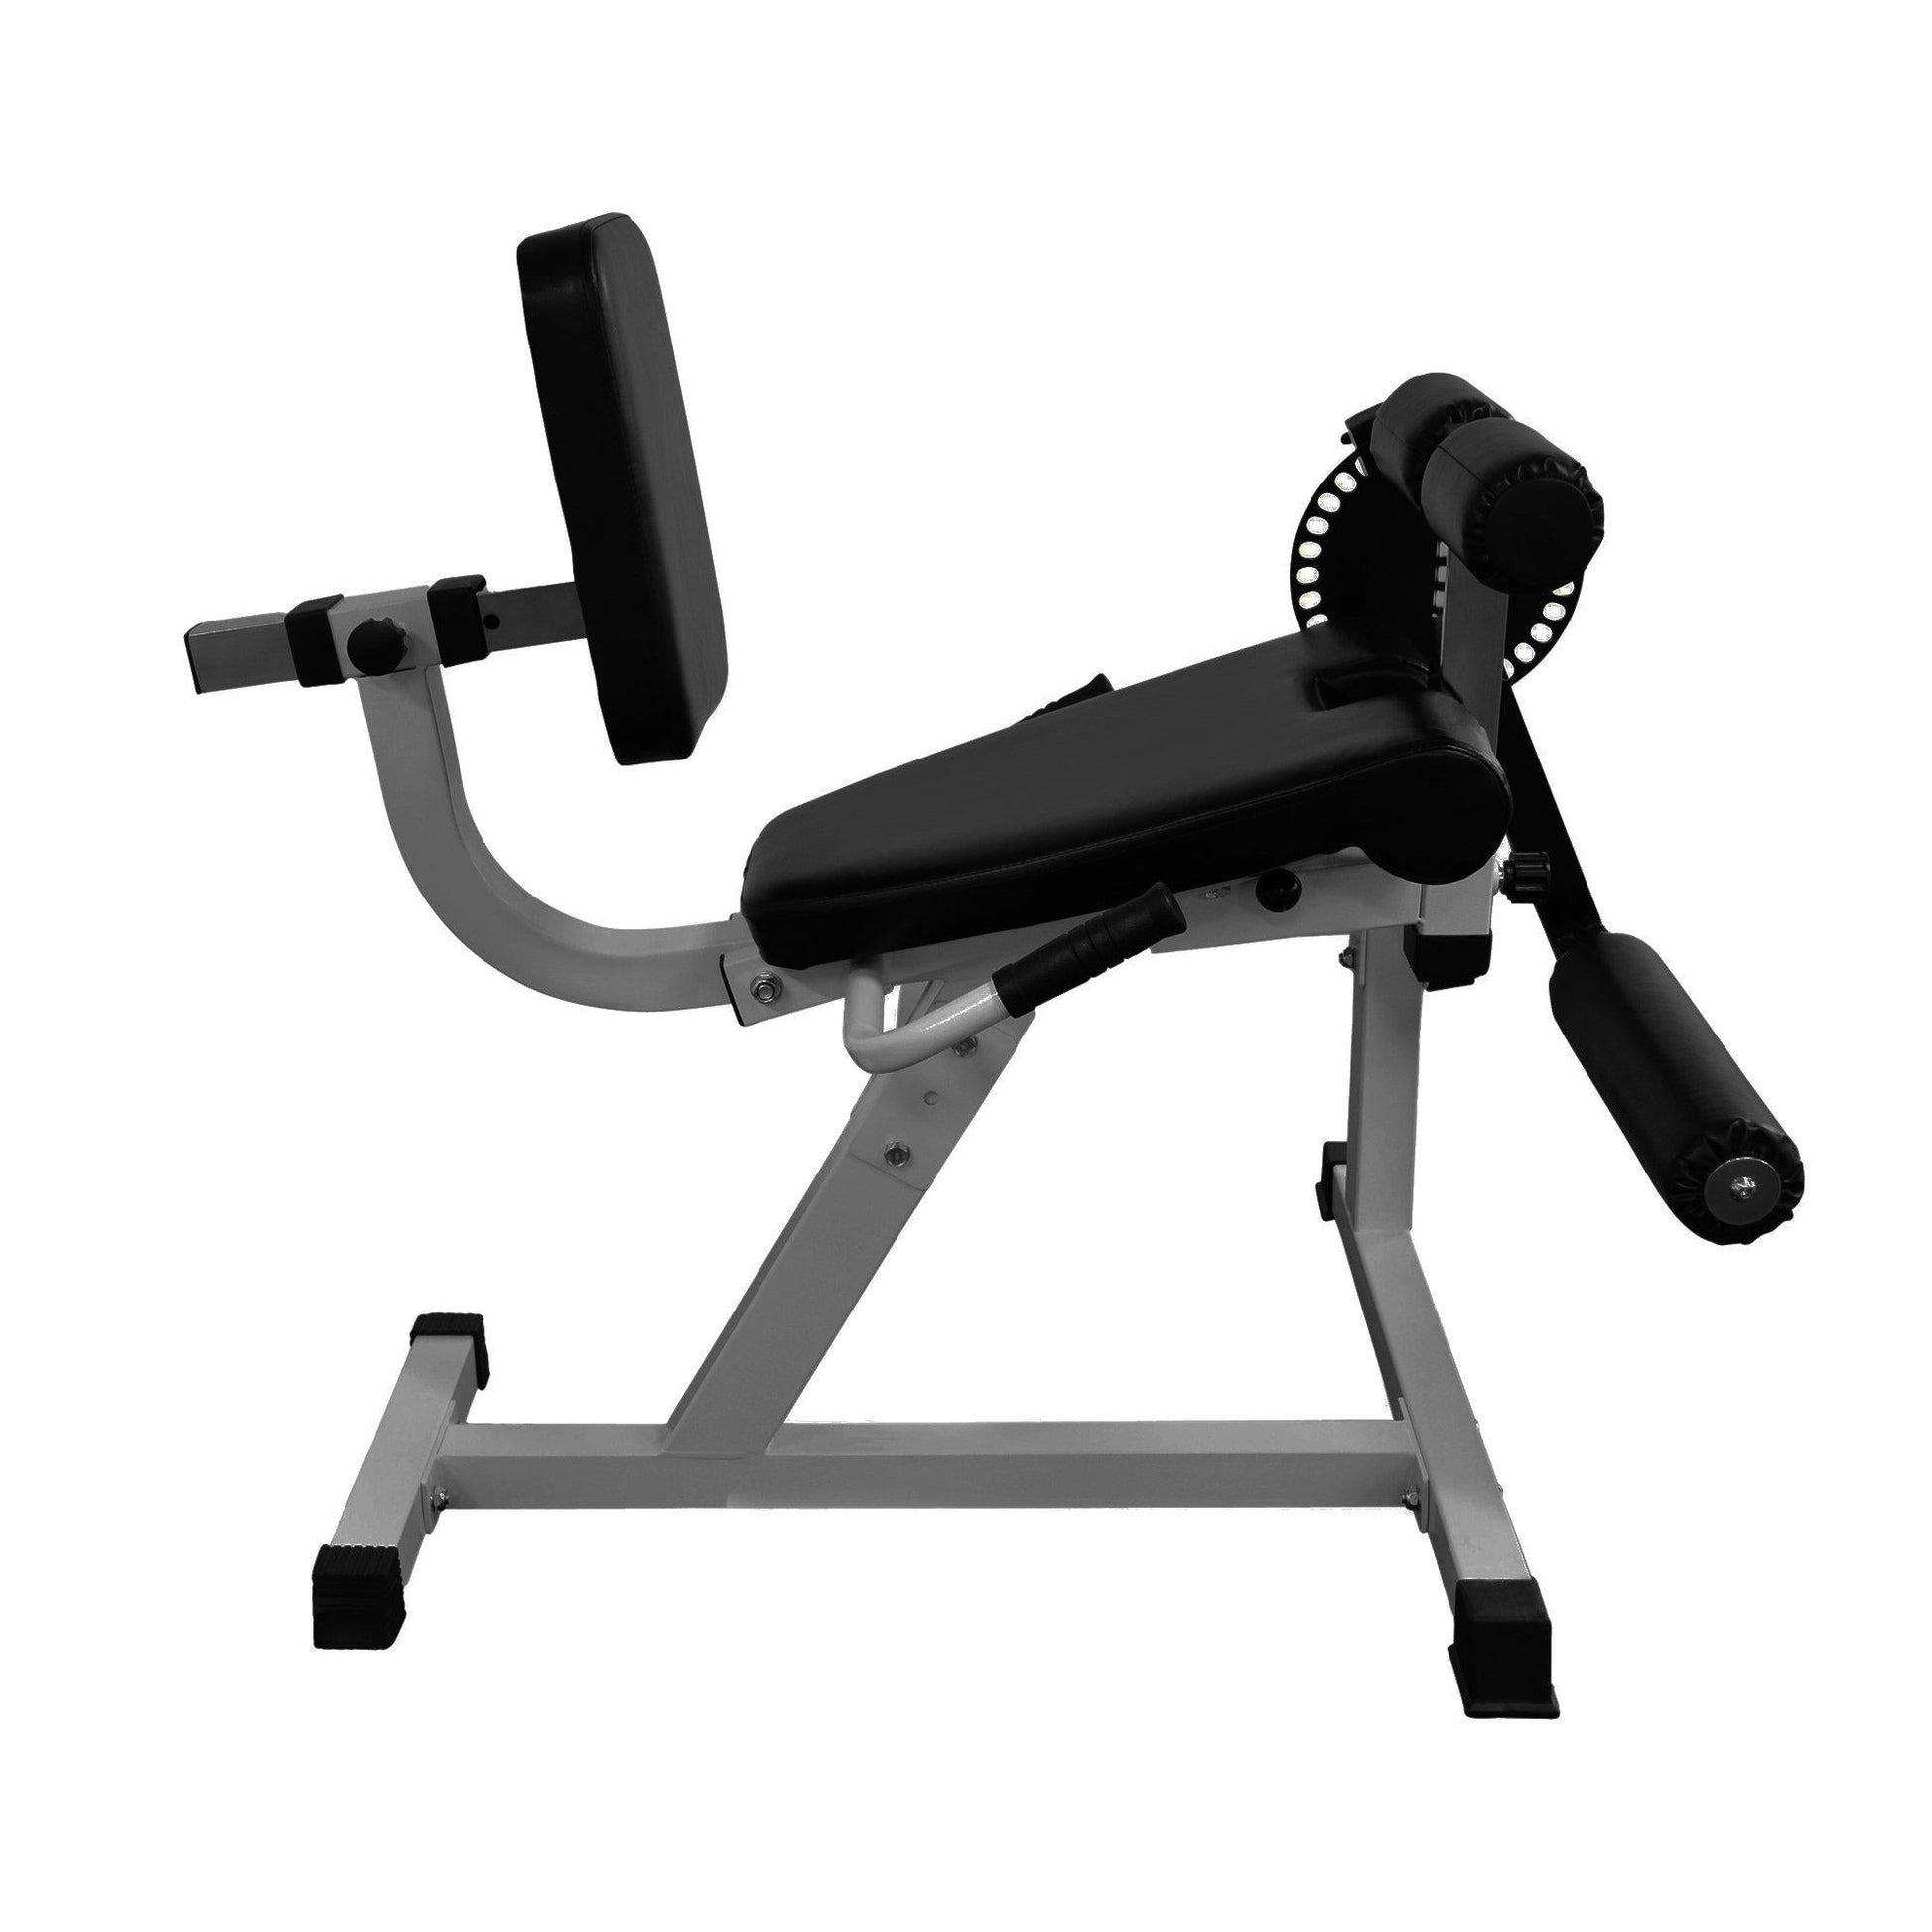 Muscle Motion - Plate Loaded Leg Curl Leg Extension Machine at GD